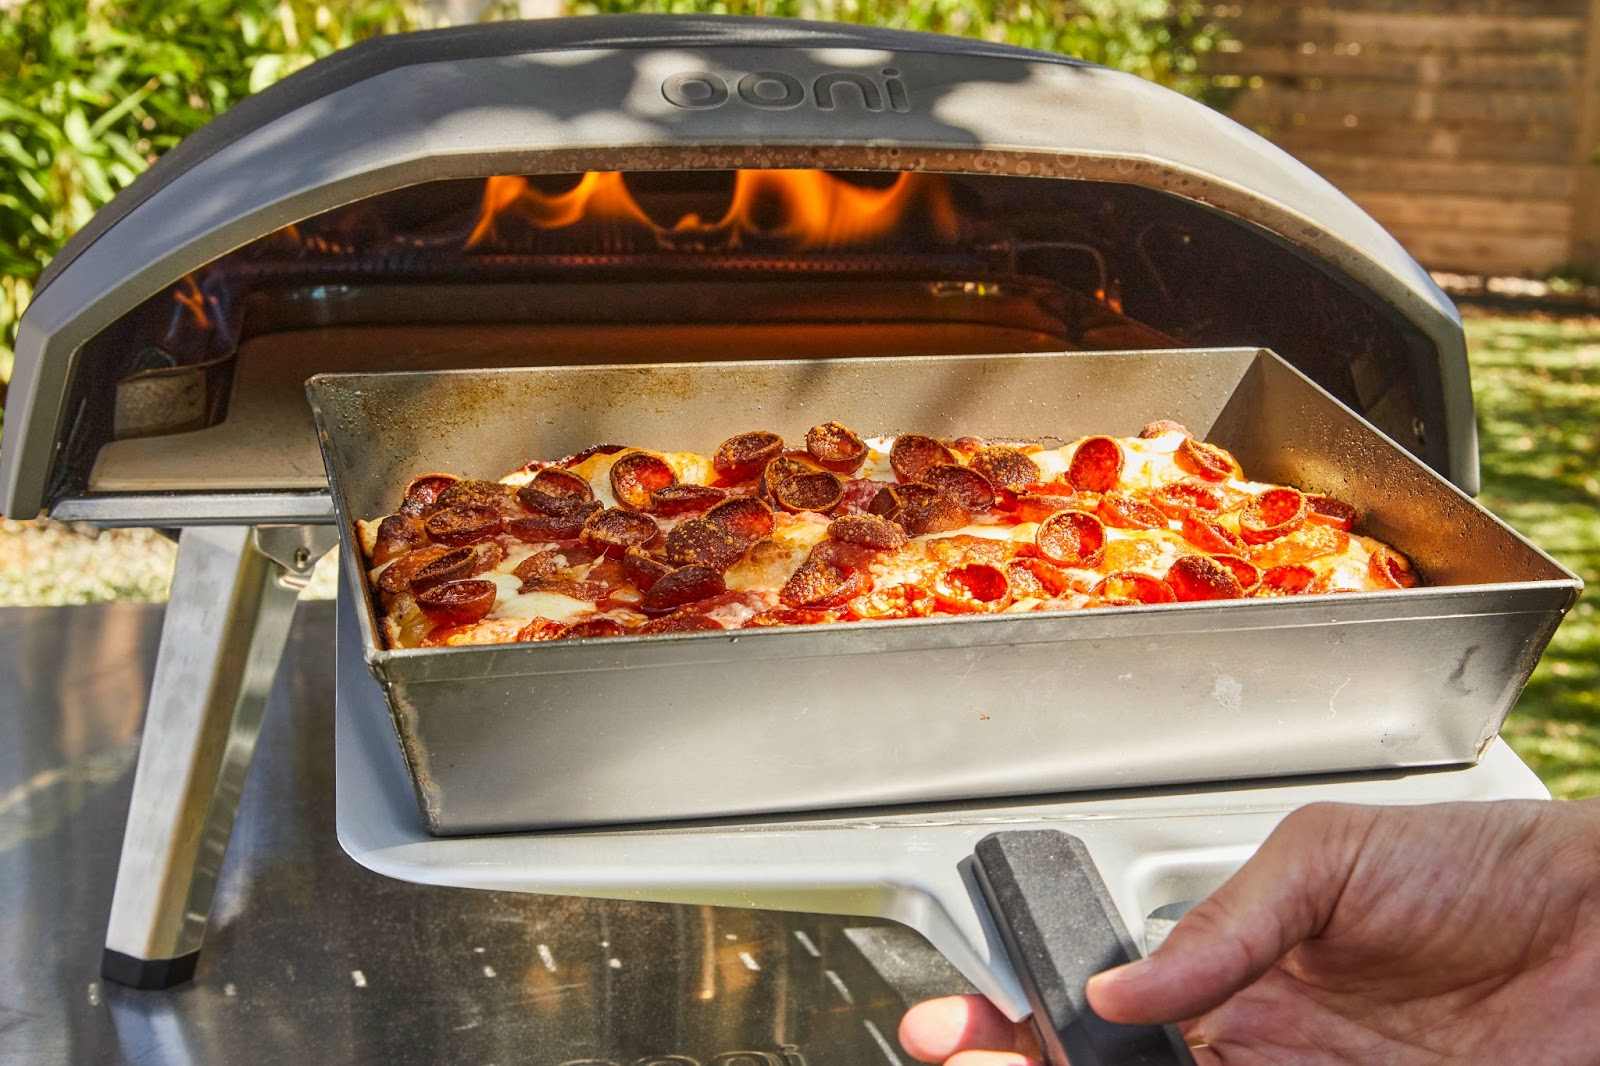 Hand holding an Ooni Pizza Peel with an overloaded pepperoni pizza in a deep dish pan in front of an Ooni oven with flames.